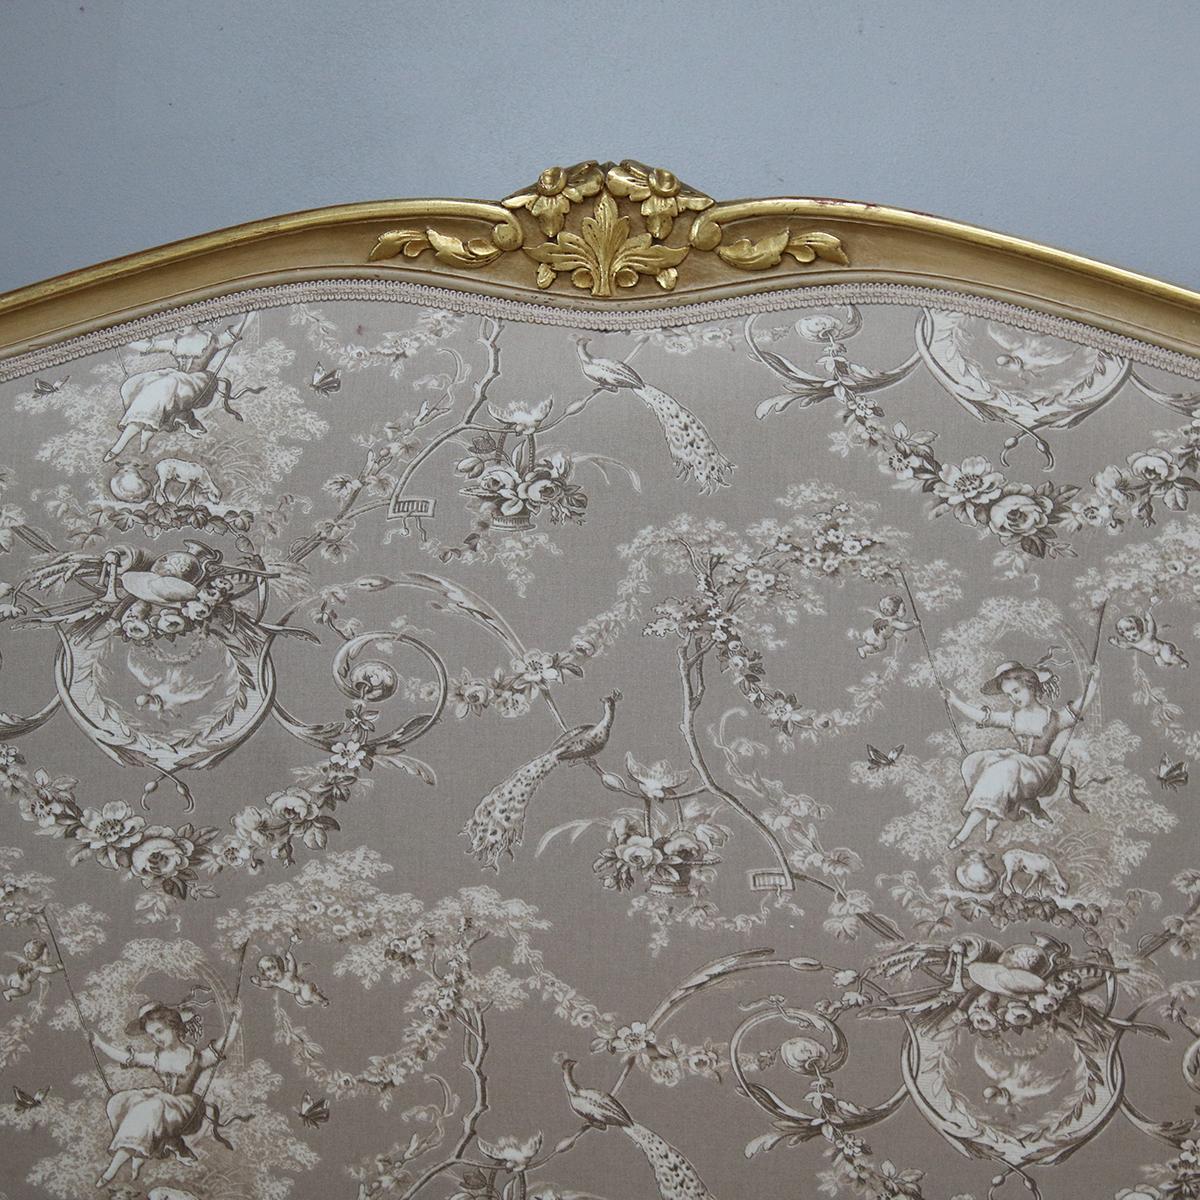 A Louis XV style bedstead with painted and gilded framework and upholstered panels. The bed comes with its original runners within the side runners. The base and mattress will need to be shaped due to the bow foot.

The bed accepts either a double